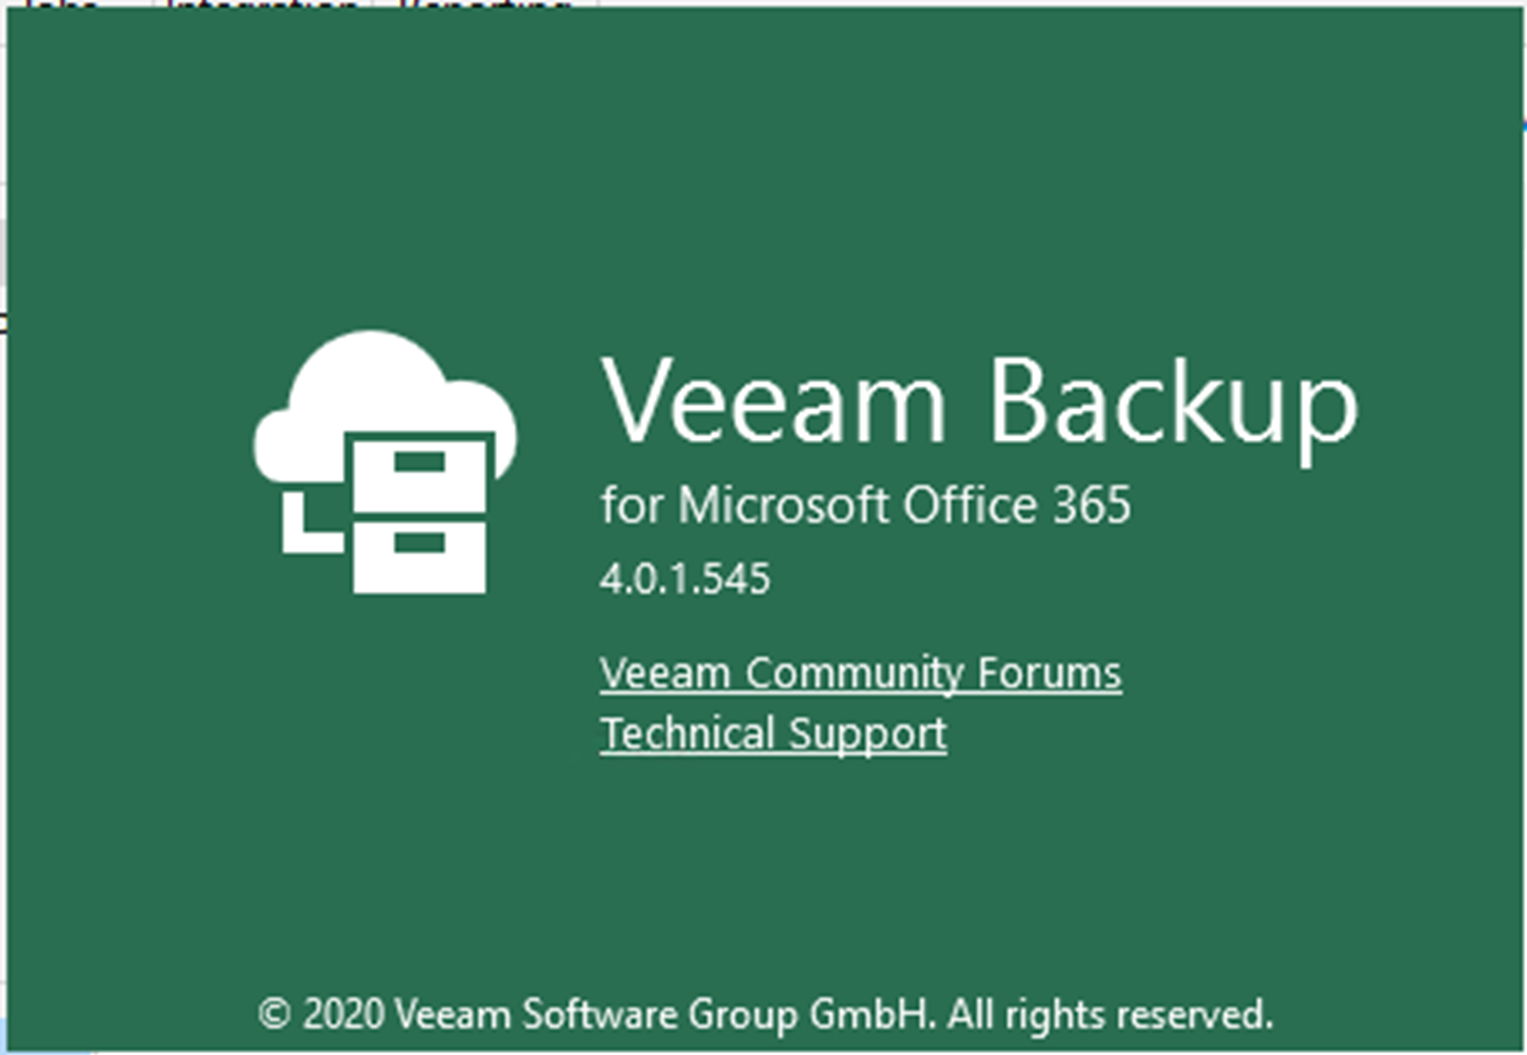 100420 0035 HowtoInstal15 - How to Install Cumulative Patch KB3222 for Veeam Backup for Microsoft Office 365 V4c